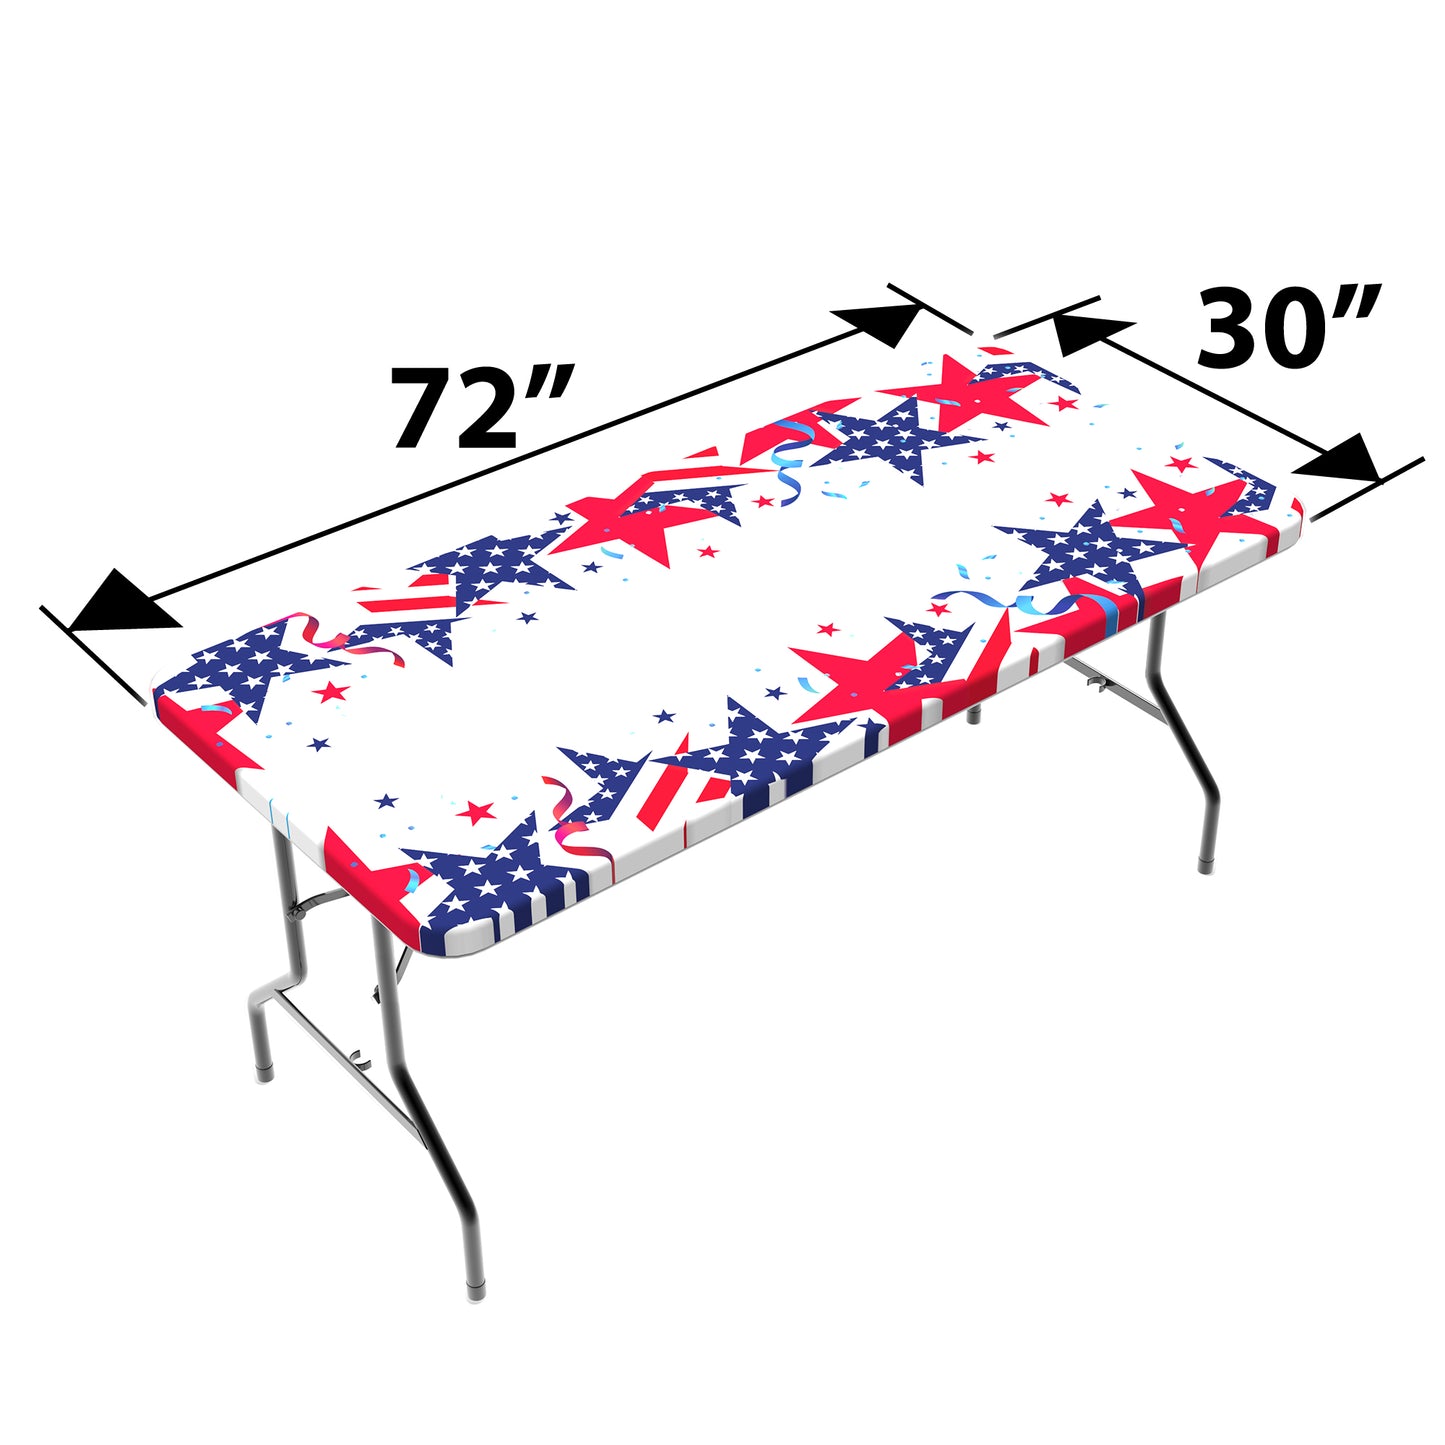 Water beading up on the water resistant surface of TableCloth PLUS 72" Patriotic Fitted PEVA Vinyl Tablecloth for 6' Folding Tables